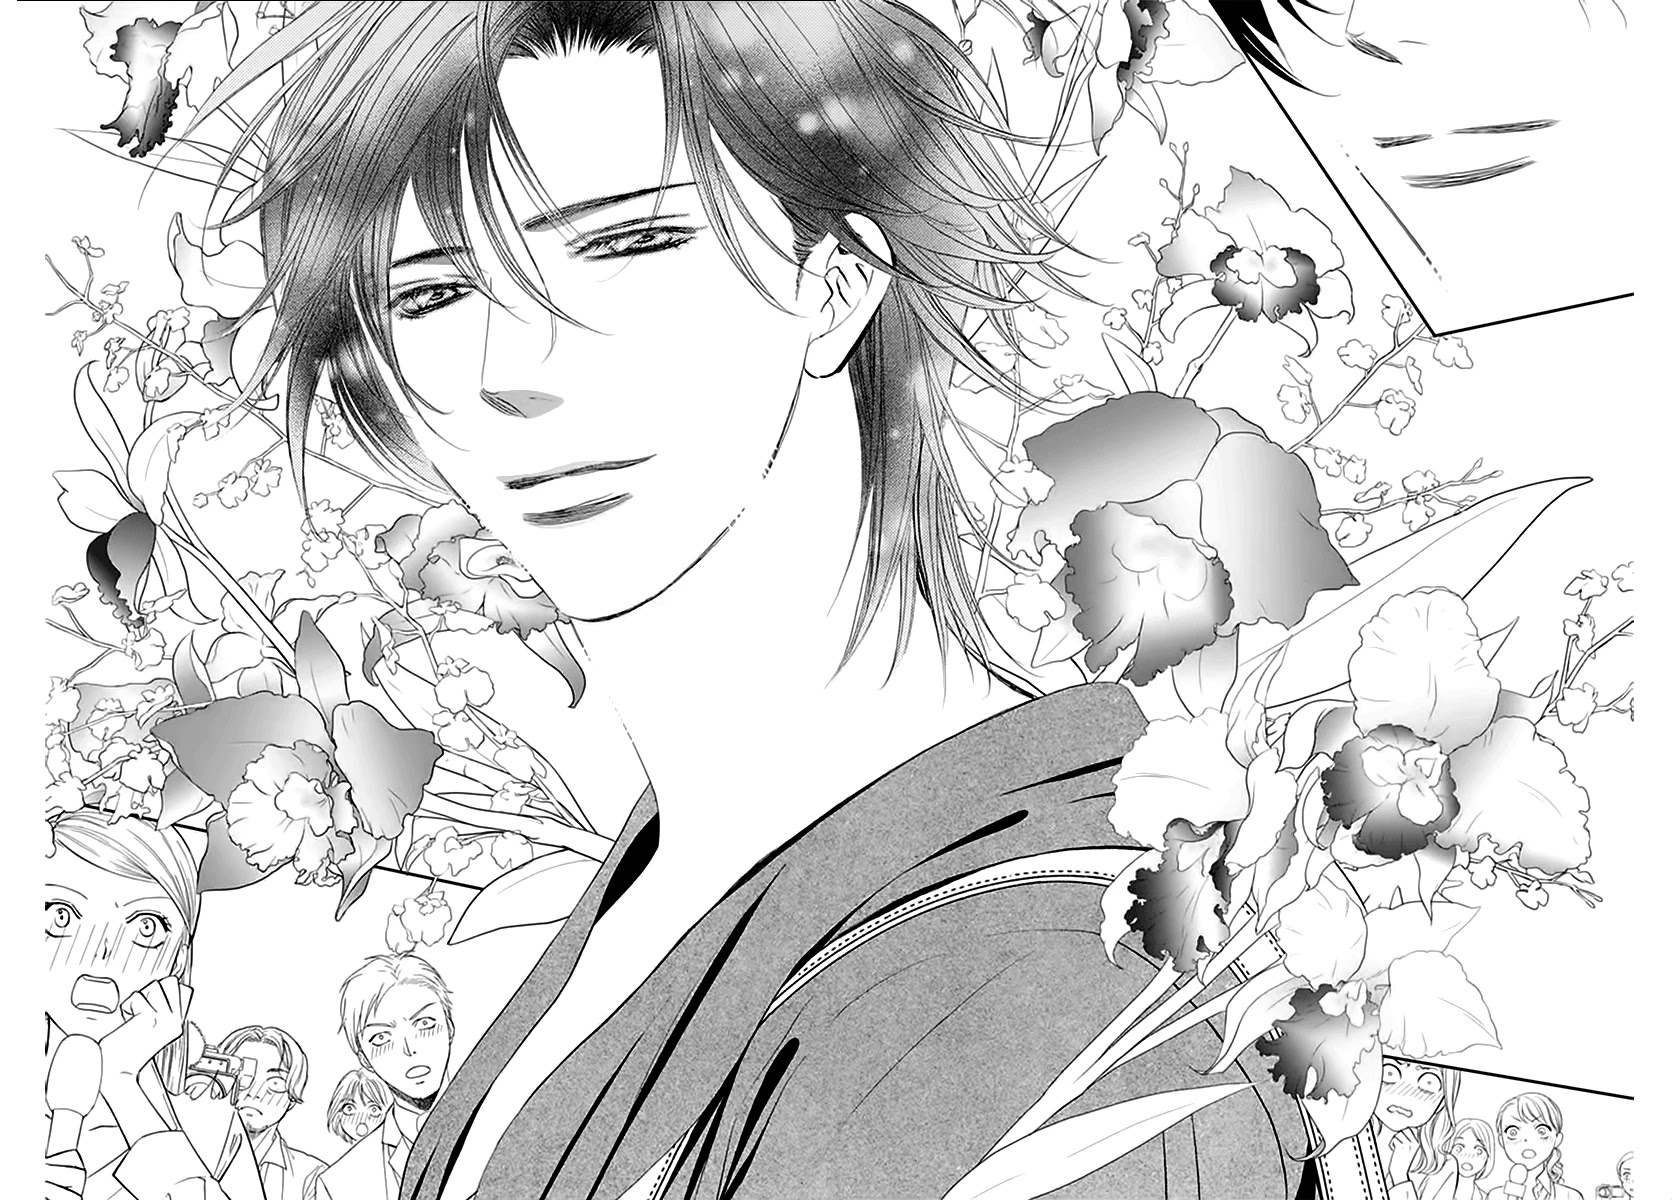 Skip Beat!, Chapter 284 Spring Sign - Waking Up to Unforeseen Circumstances image 02